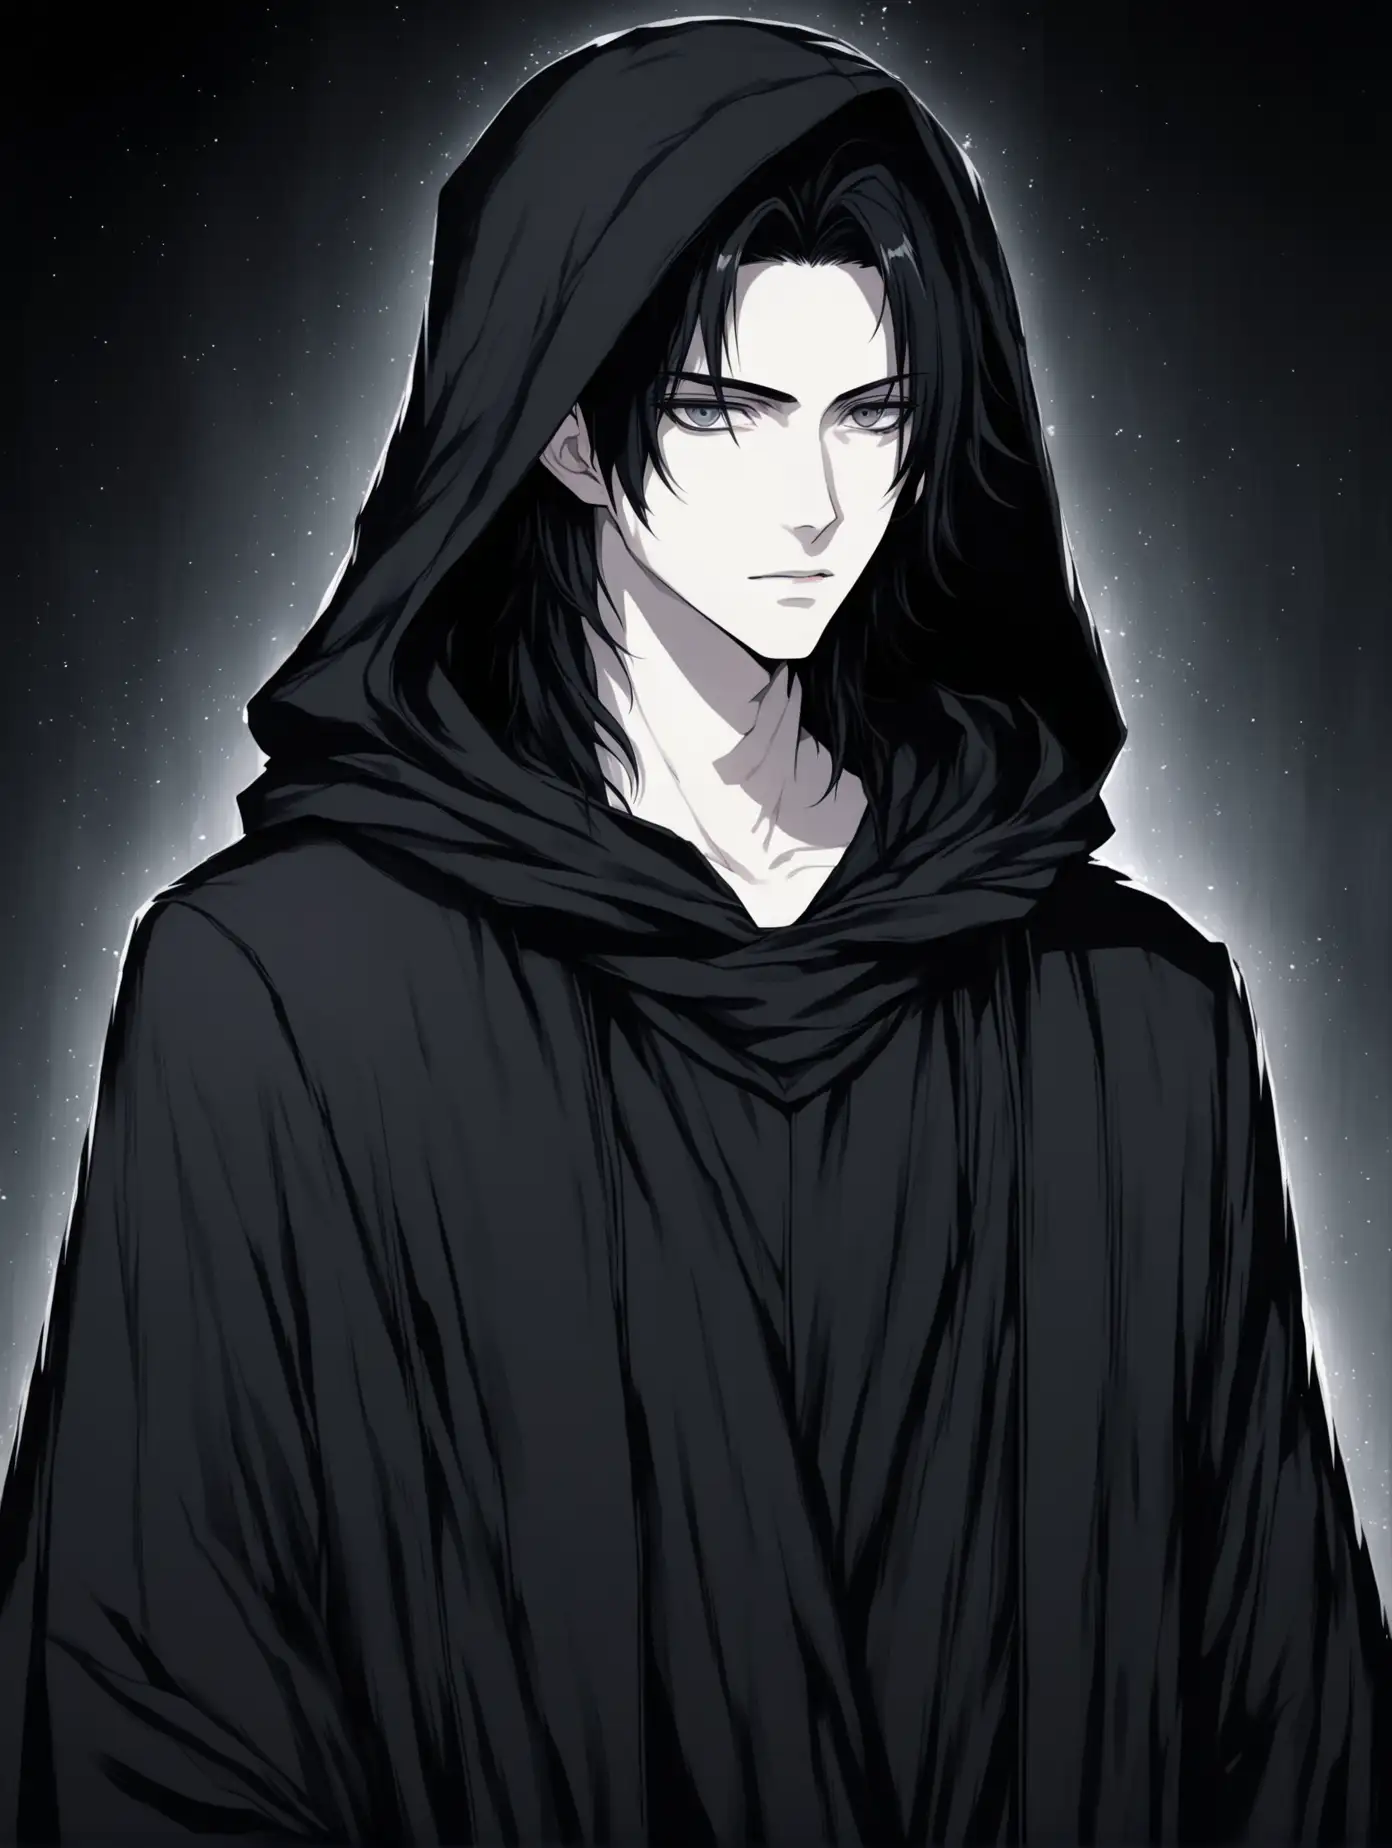 Mysterious-Anime-Character-in-Black-Robe-with-Hood